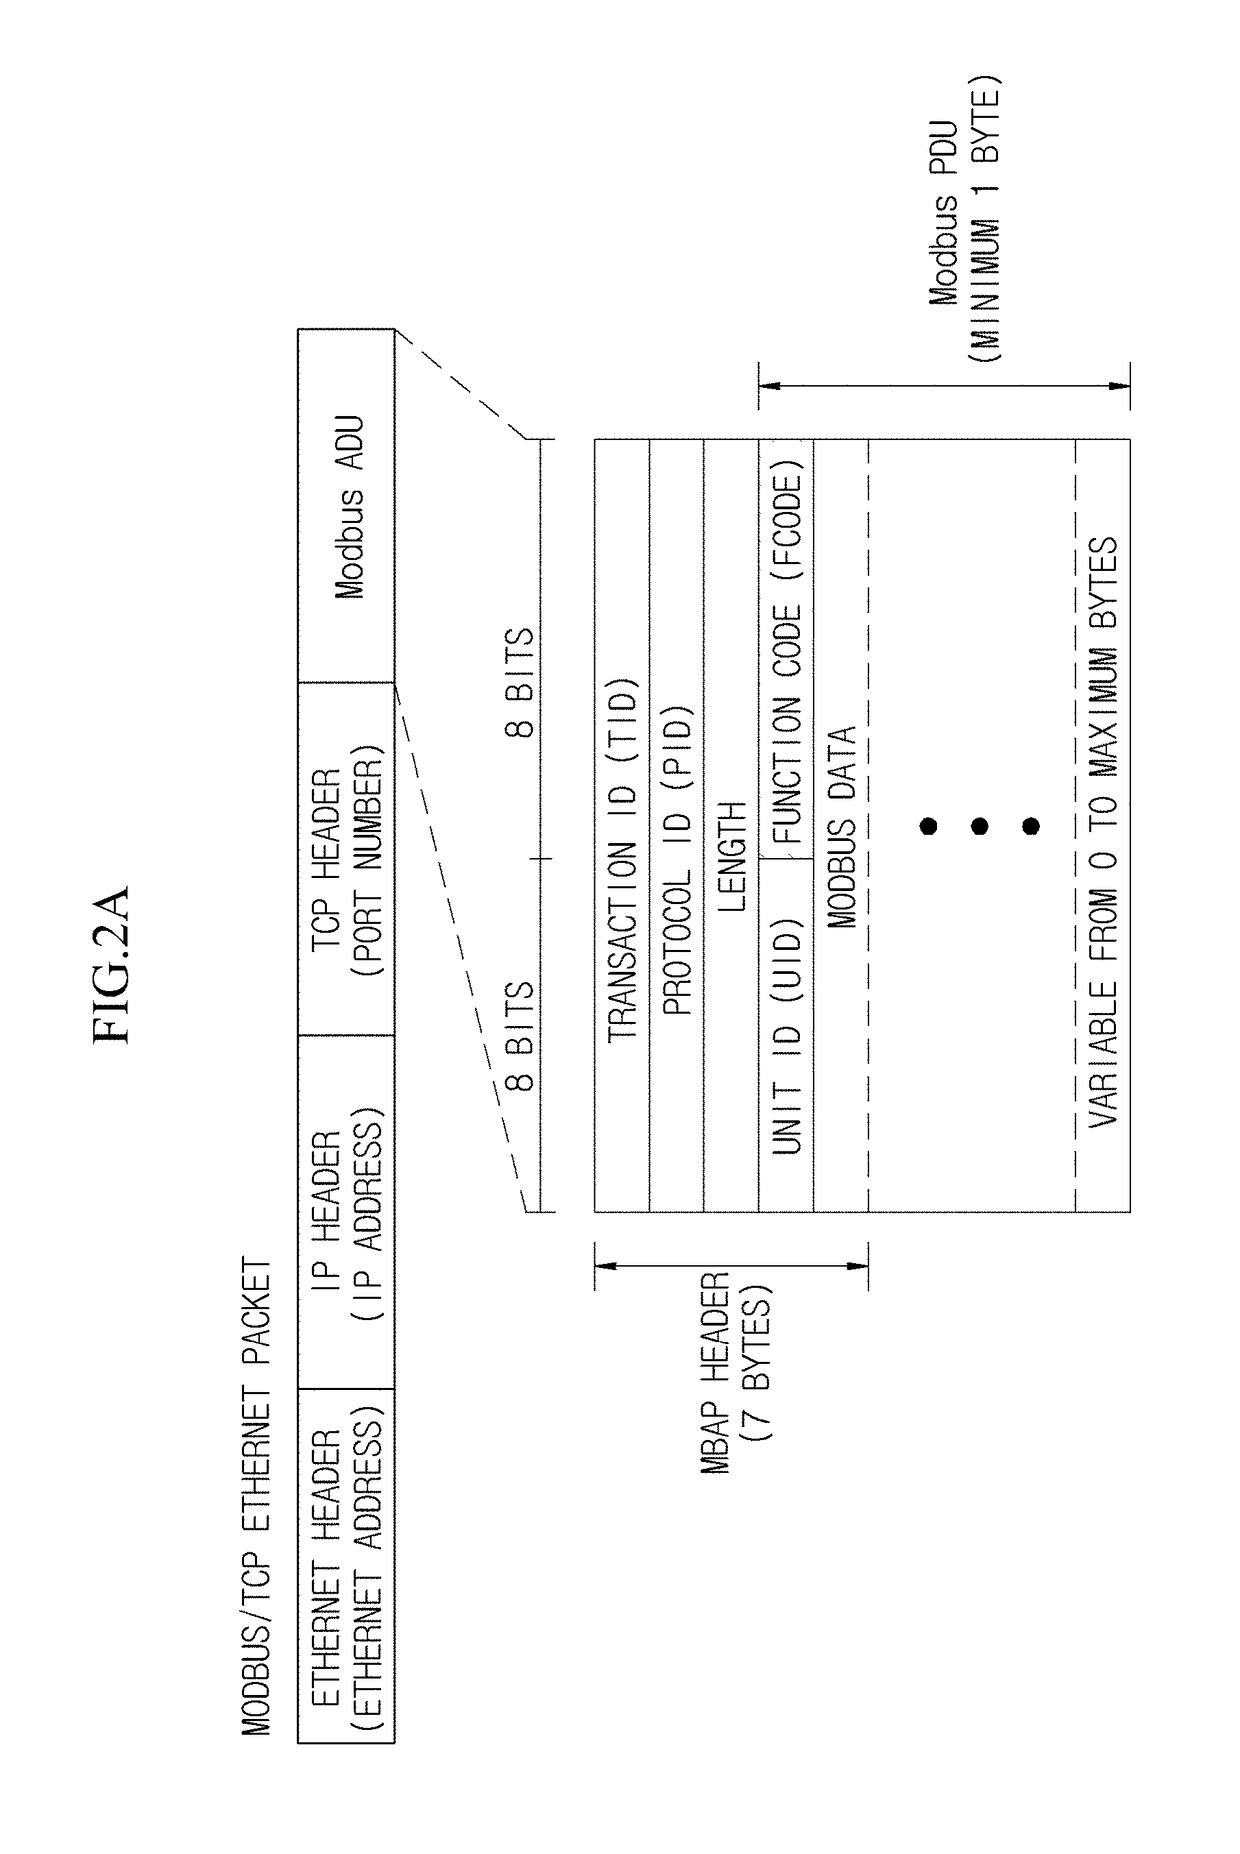 Abnormal traffic detection apparatus and method based on modbus communication pattern learning